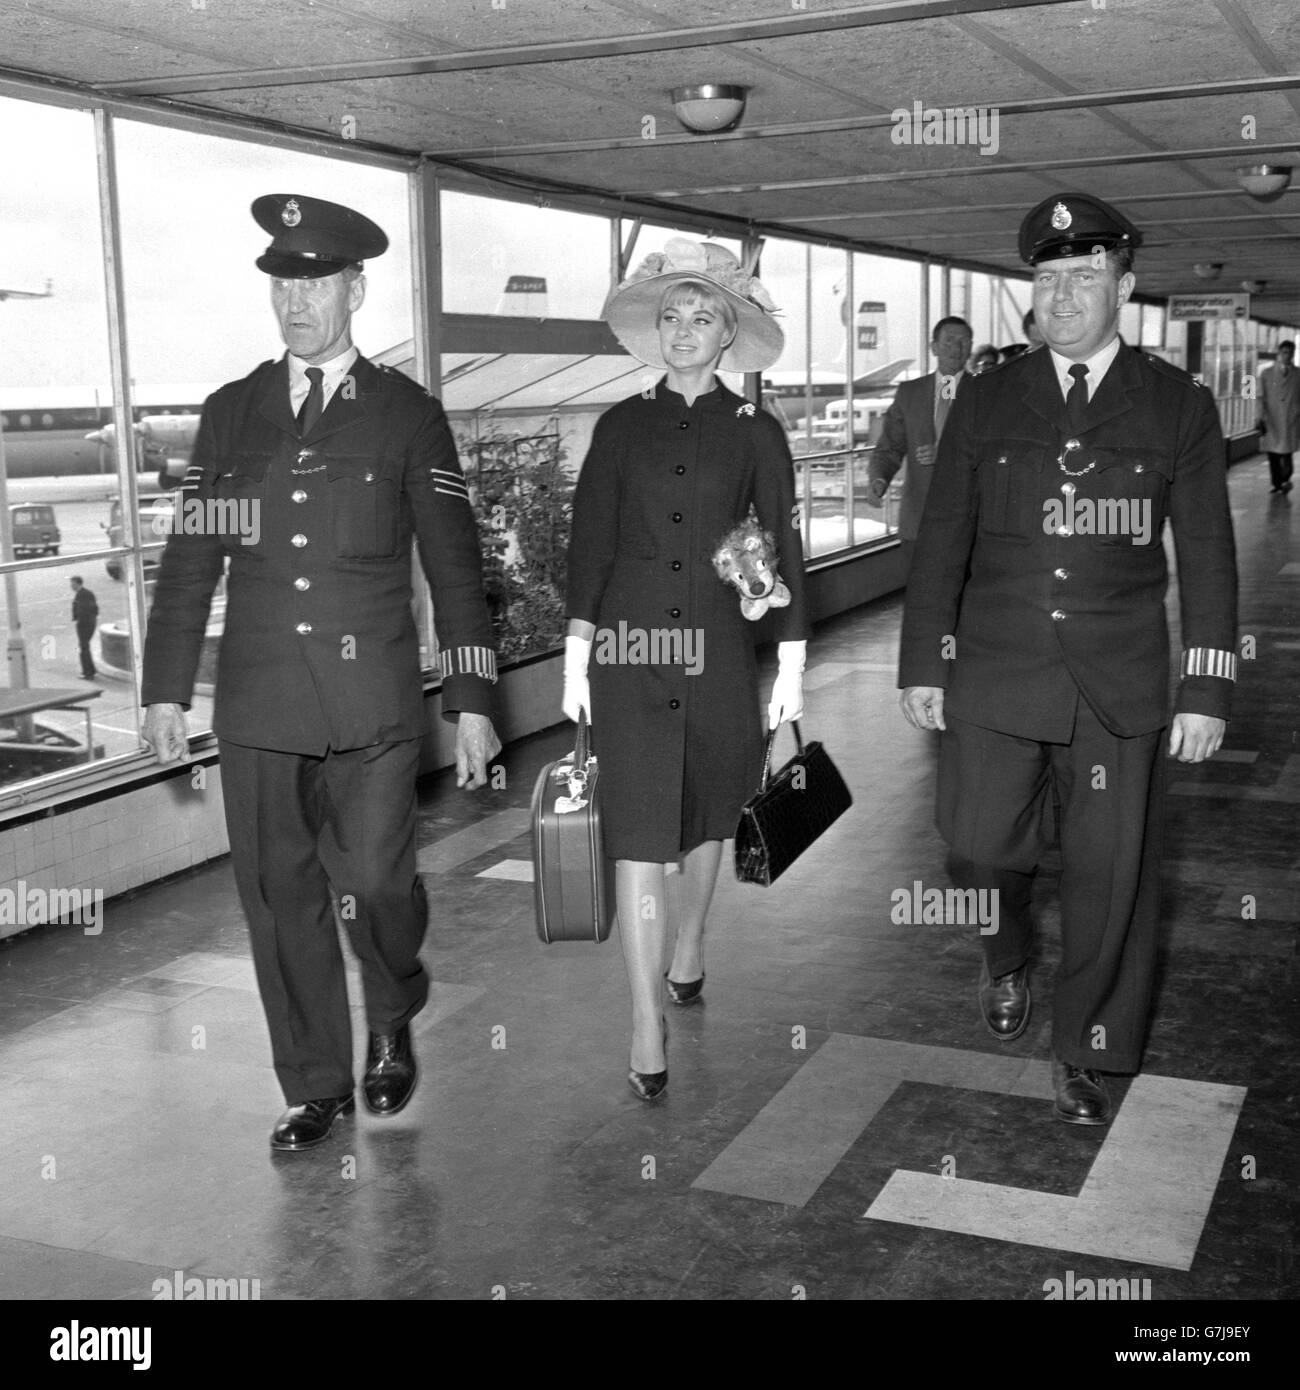 Escorted by two airport policemen, Marilyn (Mandy) Rice-Davies, 18-year-old witness in the Stephen Ward case, walks to the plane when she leaves London Airport for Palma, Majorca. Stock Photo